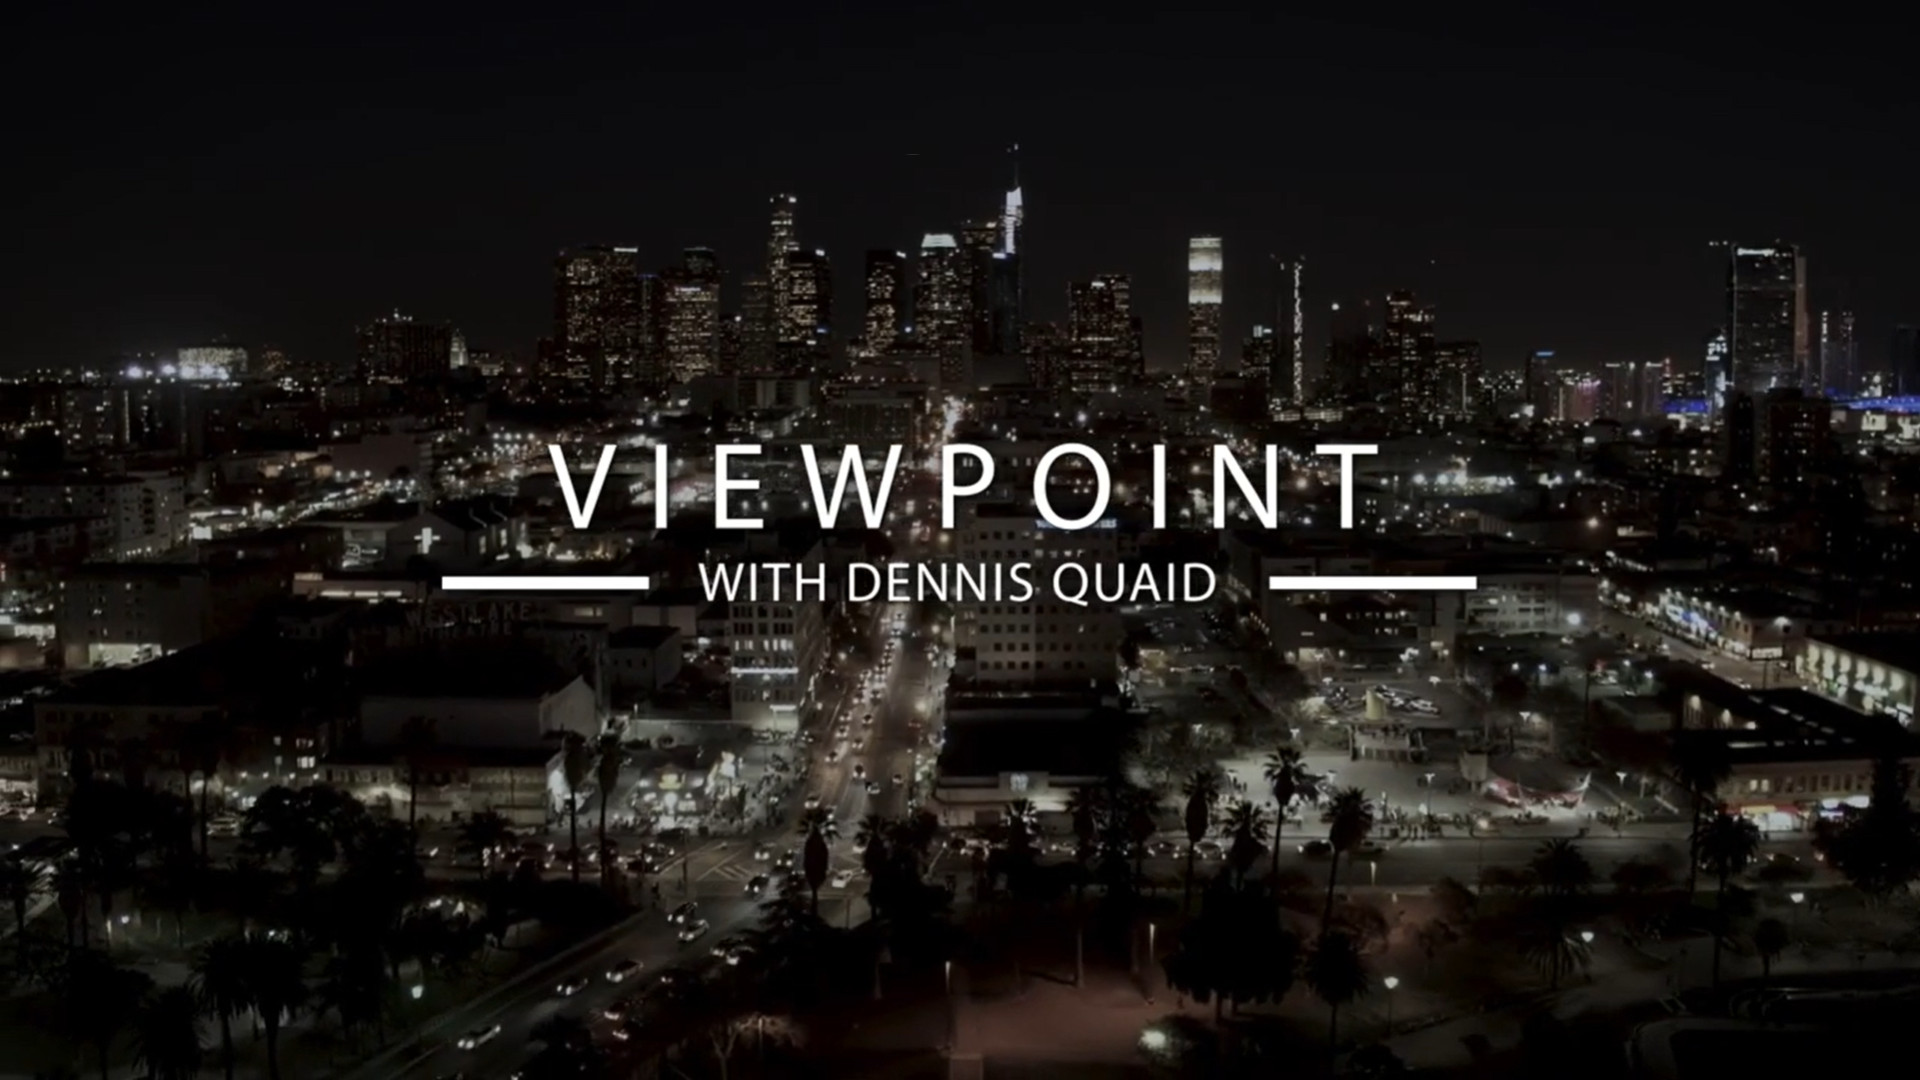 Viewpoint with Dennis Quaid opening nighttime aerial view.